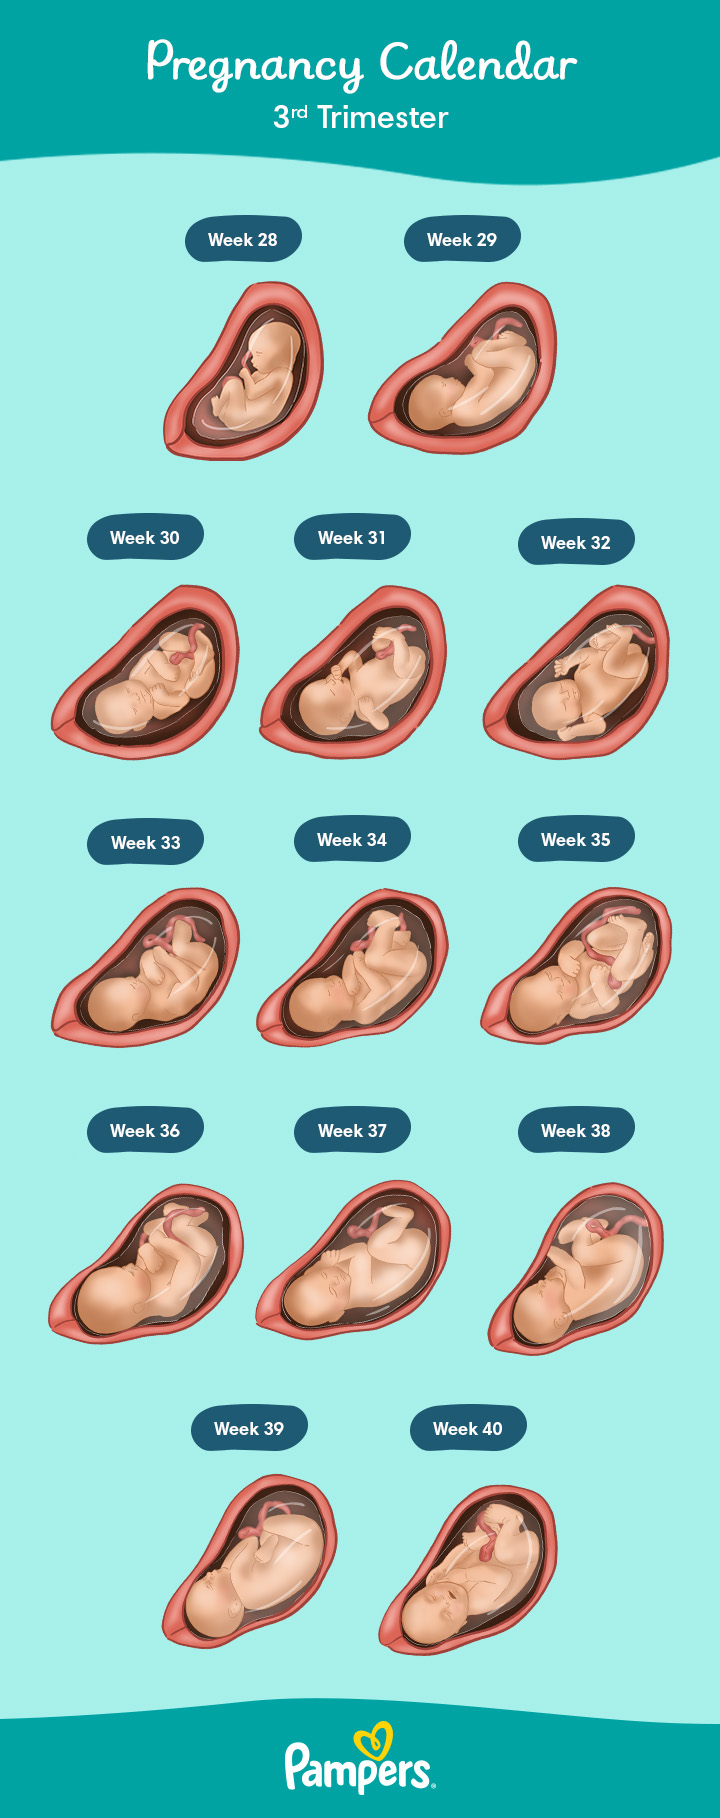 sex positions during 3rd trimester pregnancy